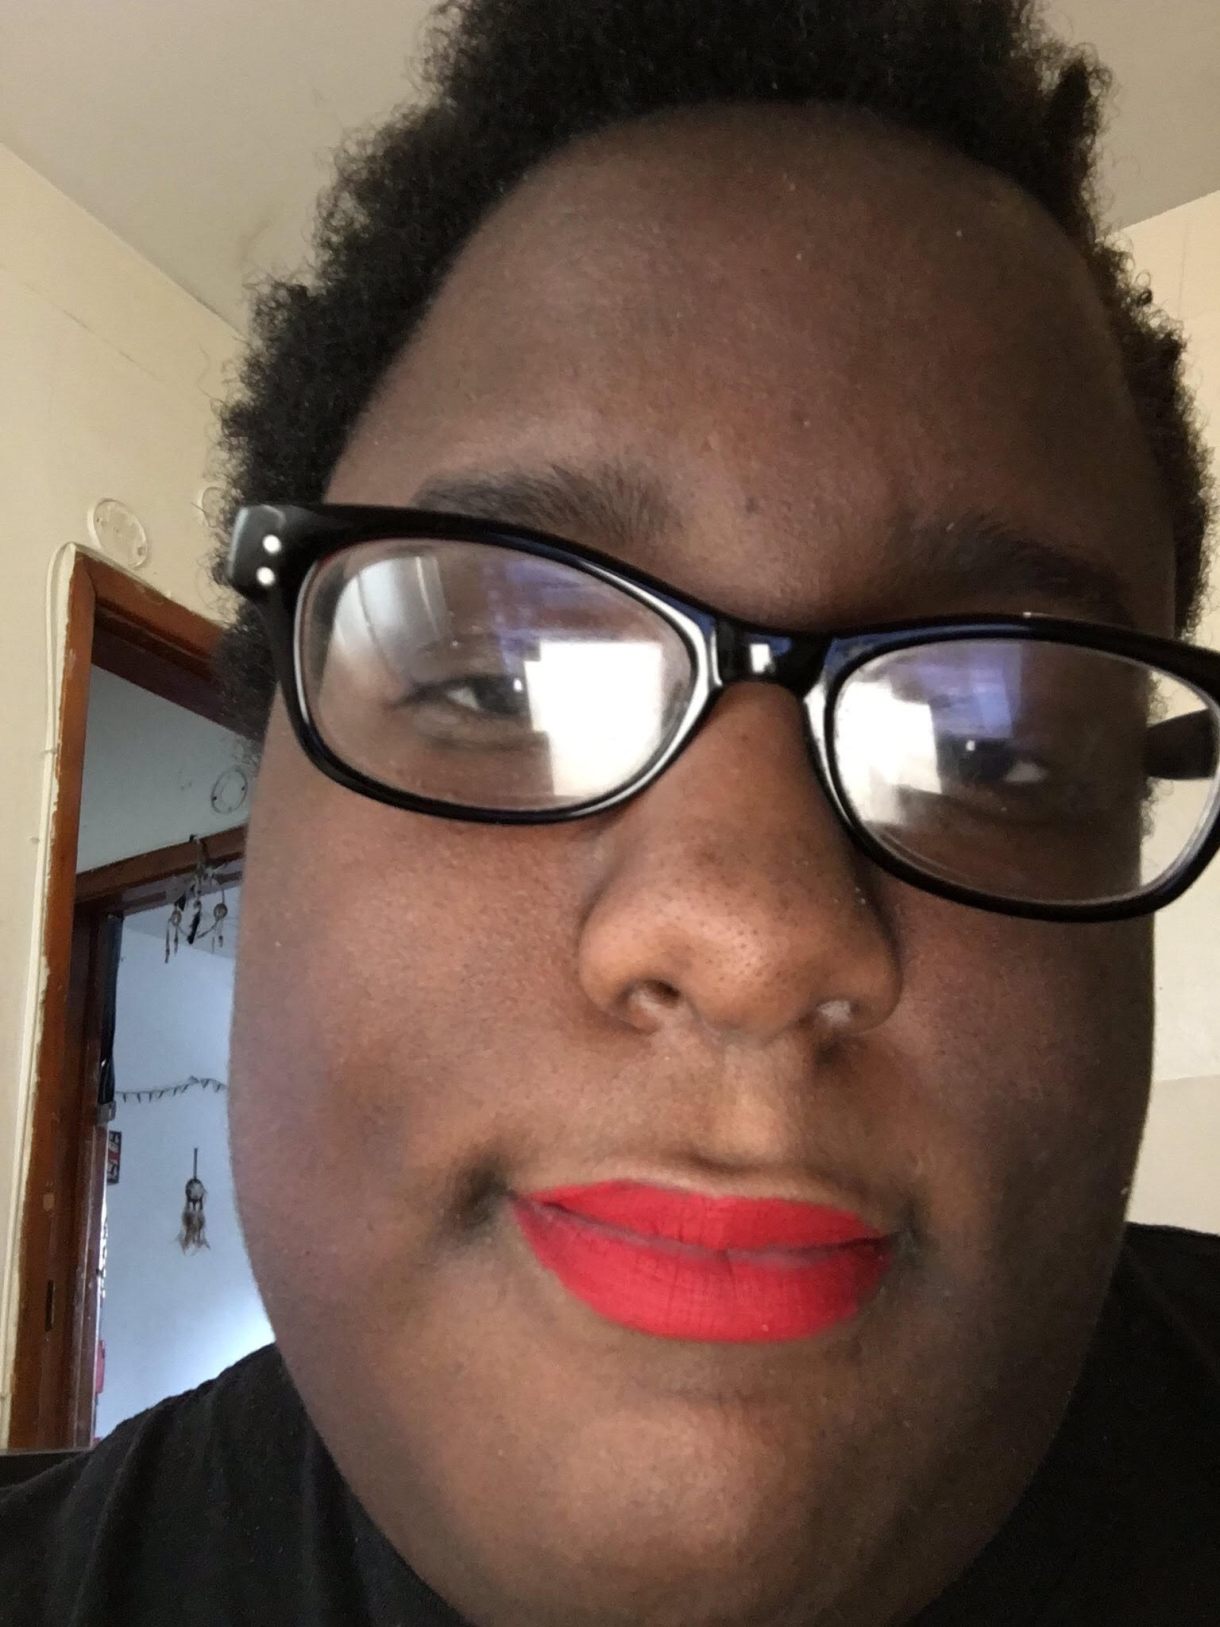 Selfie of a black woman with short black hair and wearing red lipstick and black square-framed glasses smiling close-mouthed into the camera.